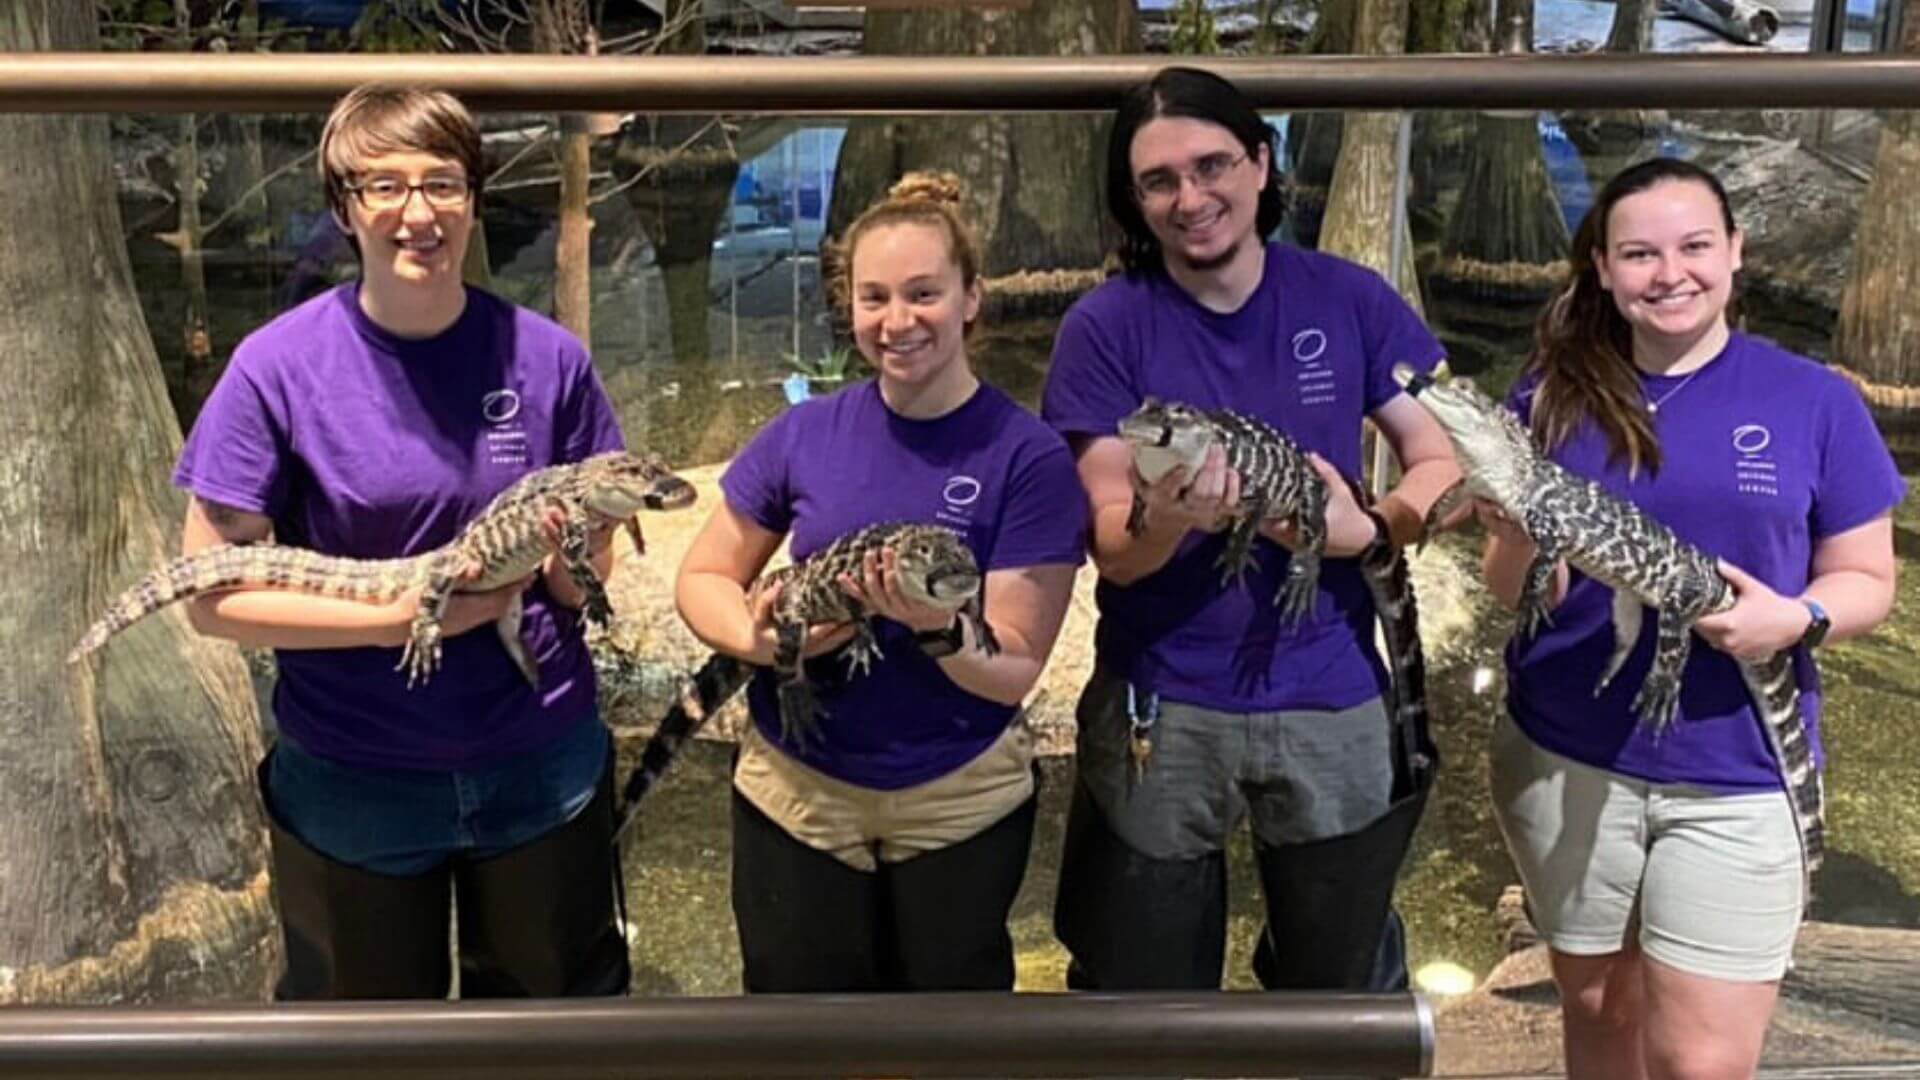 animal keepers at orlando science center raise zoo awareness